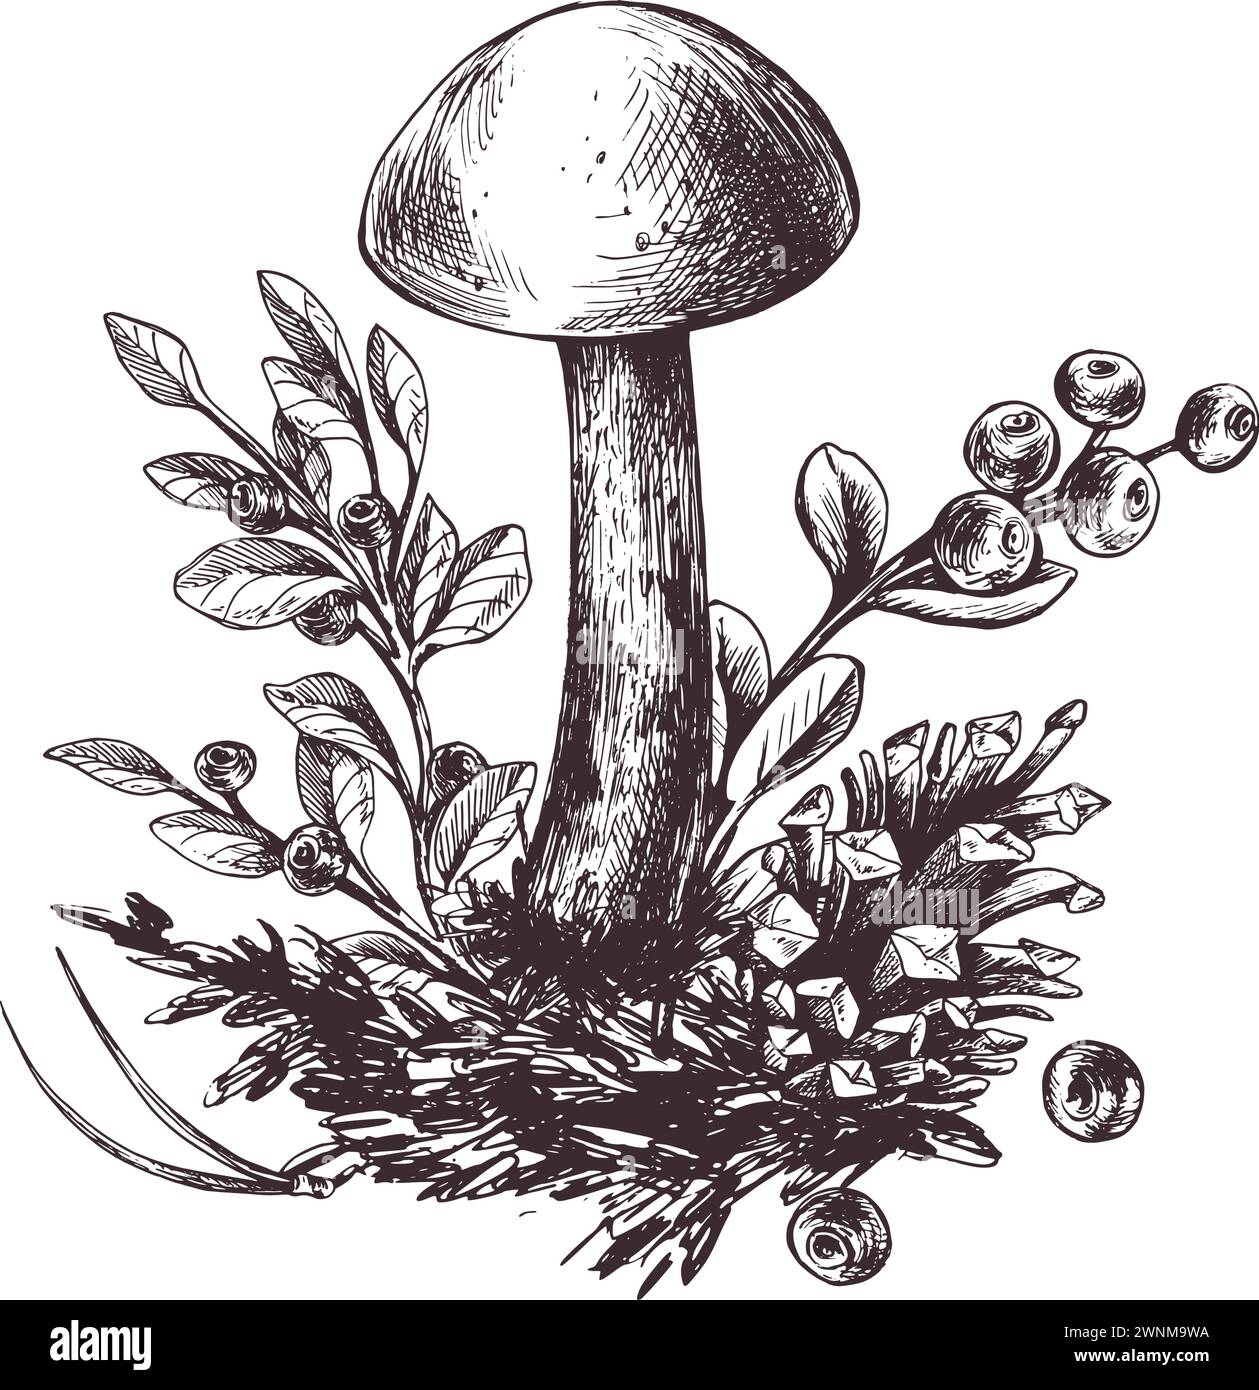 Mushrooms forest boletus with grass, blueberries, moss and cone. Graphic botanical illustration hand drawn in brown ink. For recipes, packaging Stock Vector